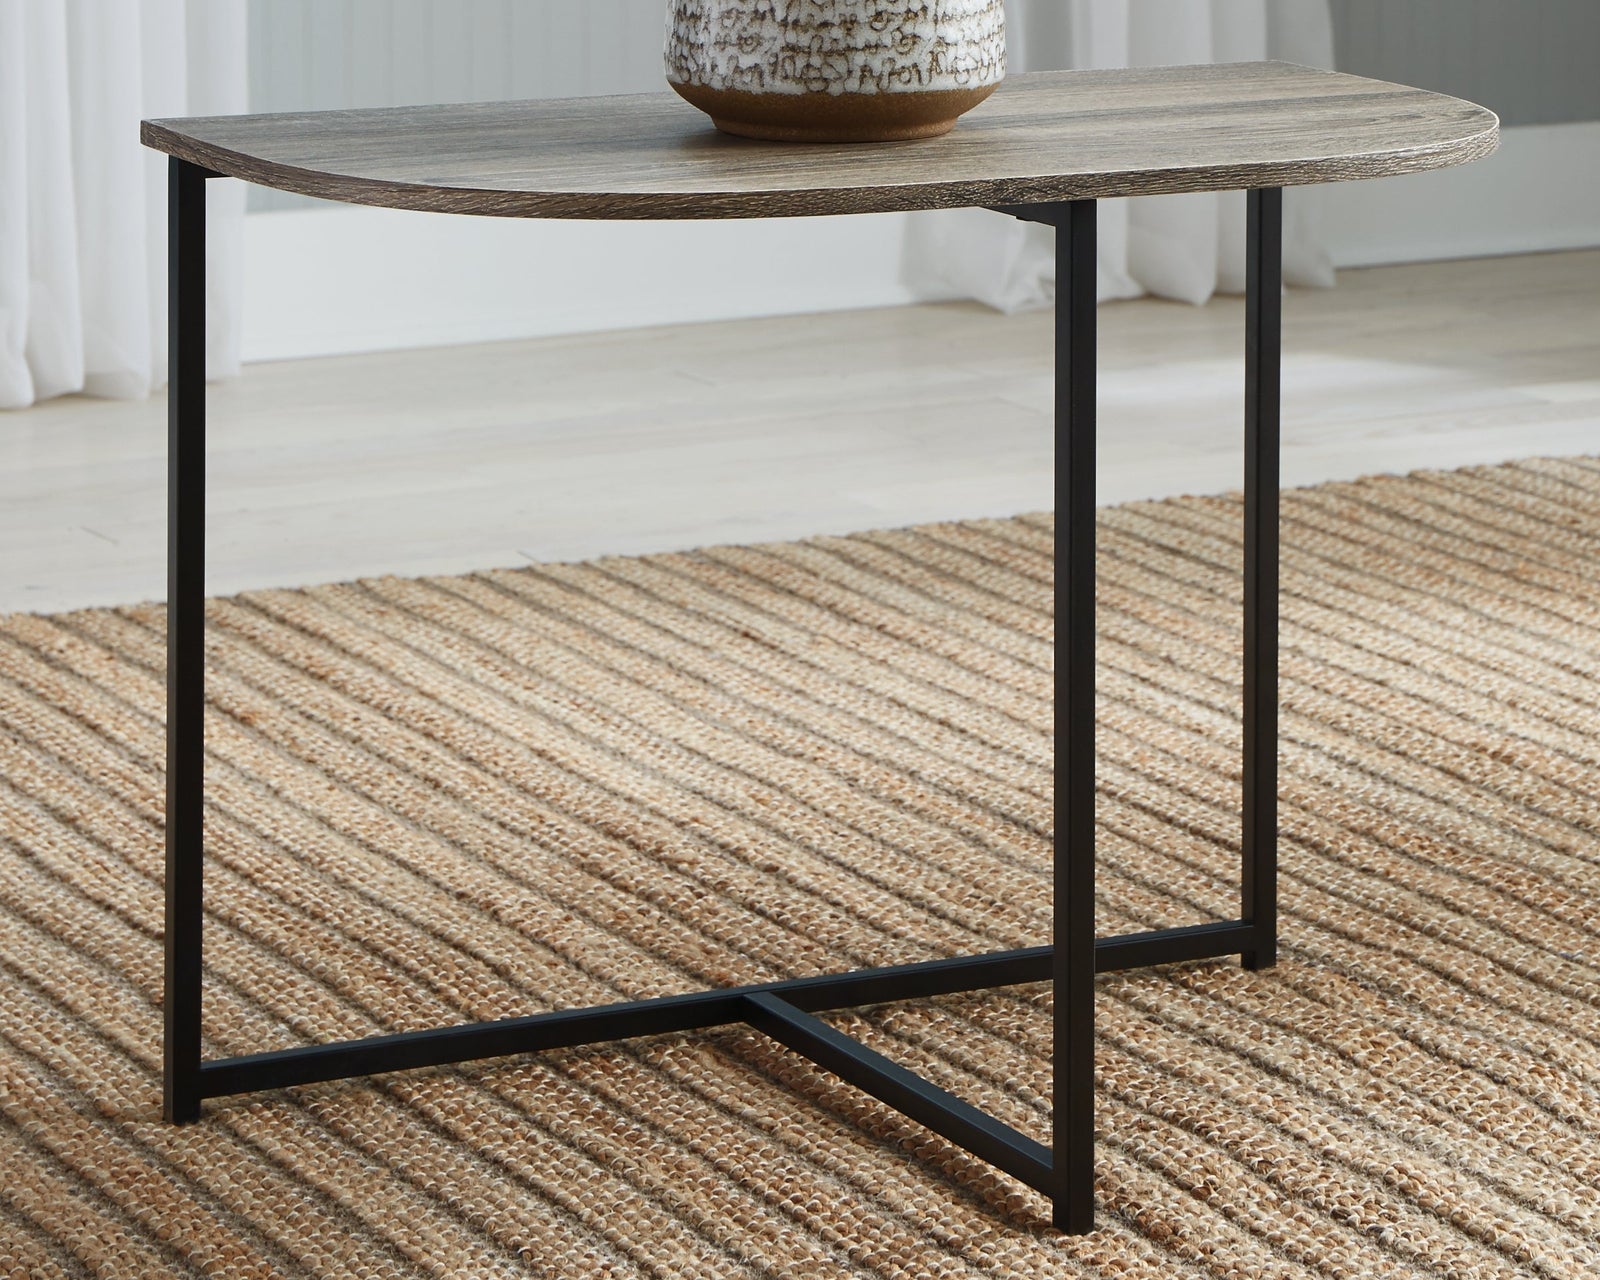 Wadeworth Two-tone Chairside End Table